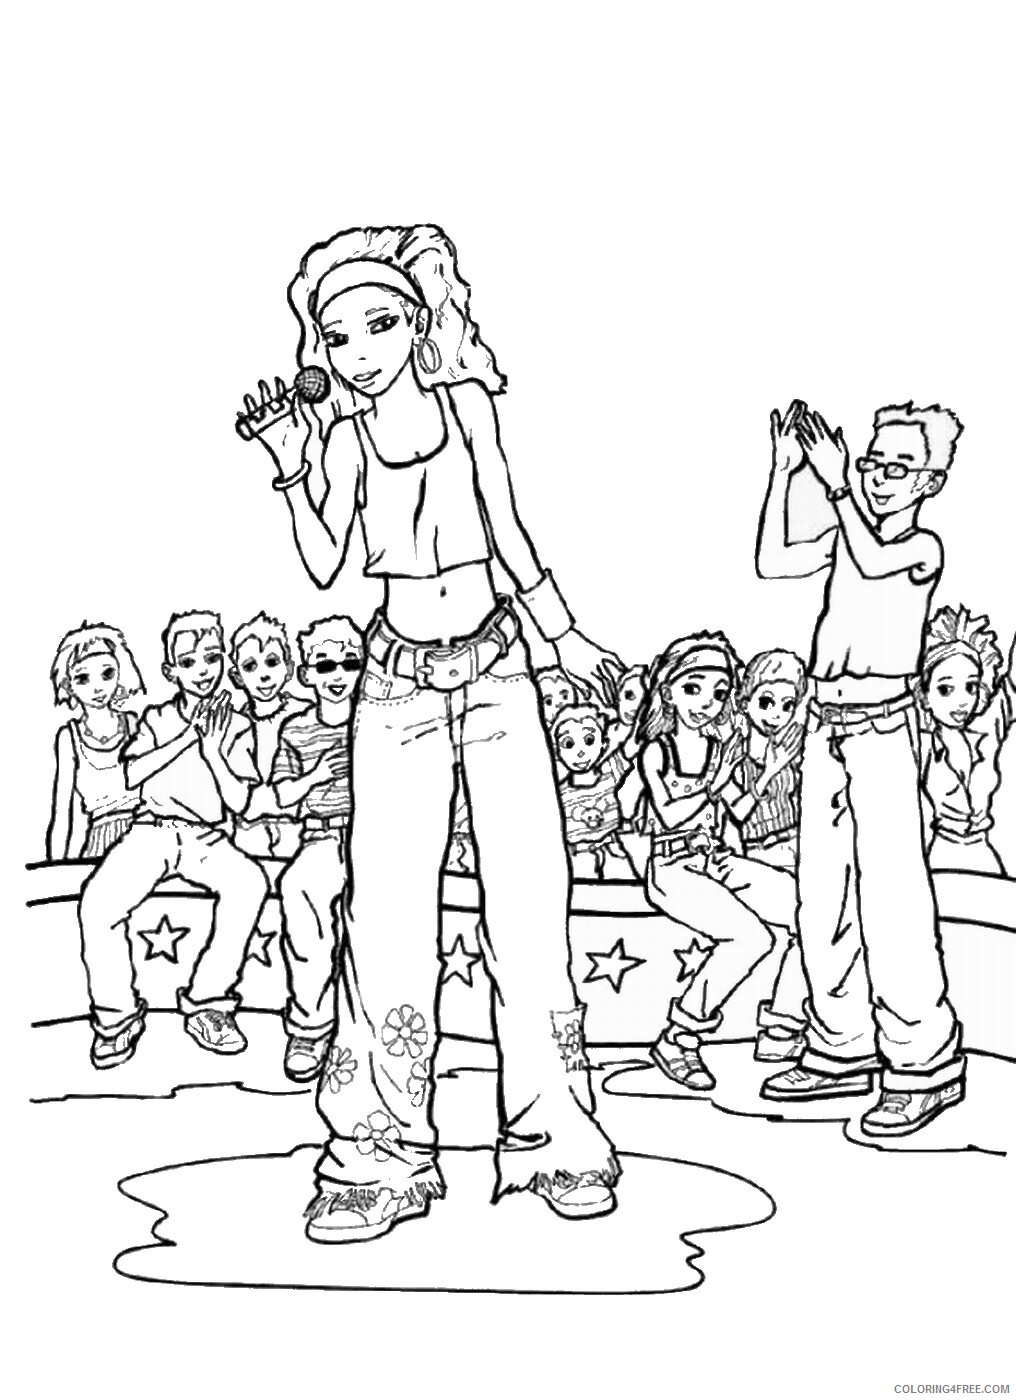 Rock Star Coloring Pages rock_star_coloring_18 Printable 2021 5101 Coloring4free